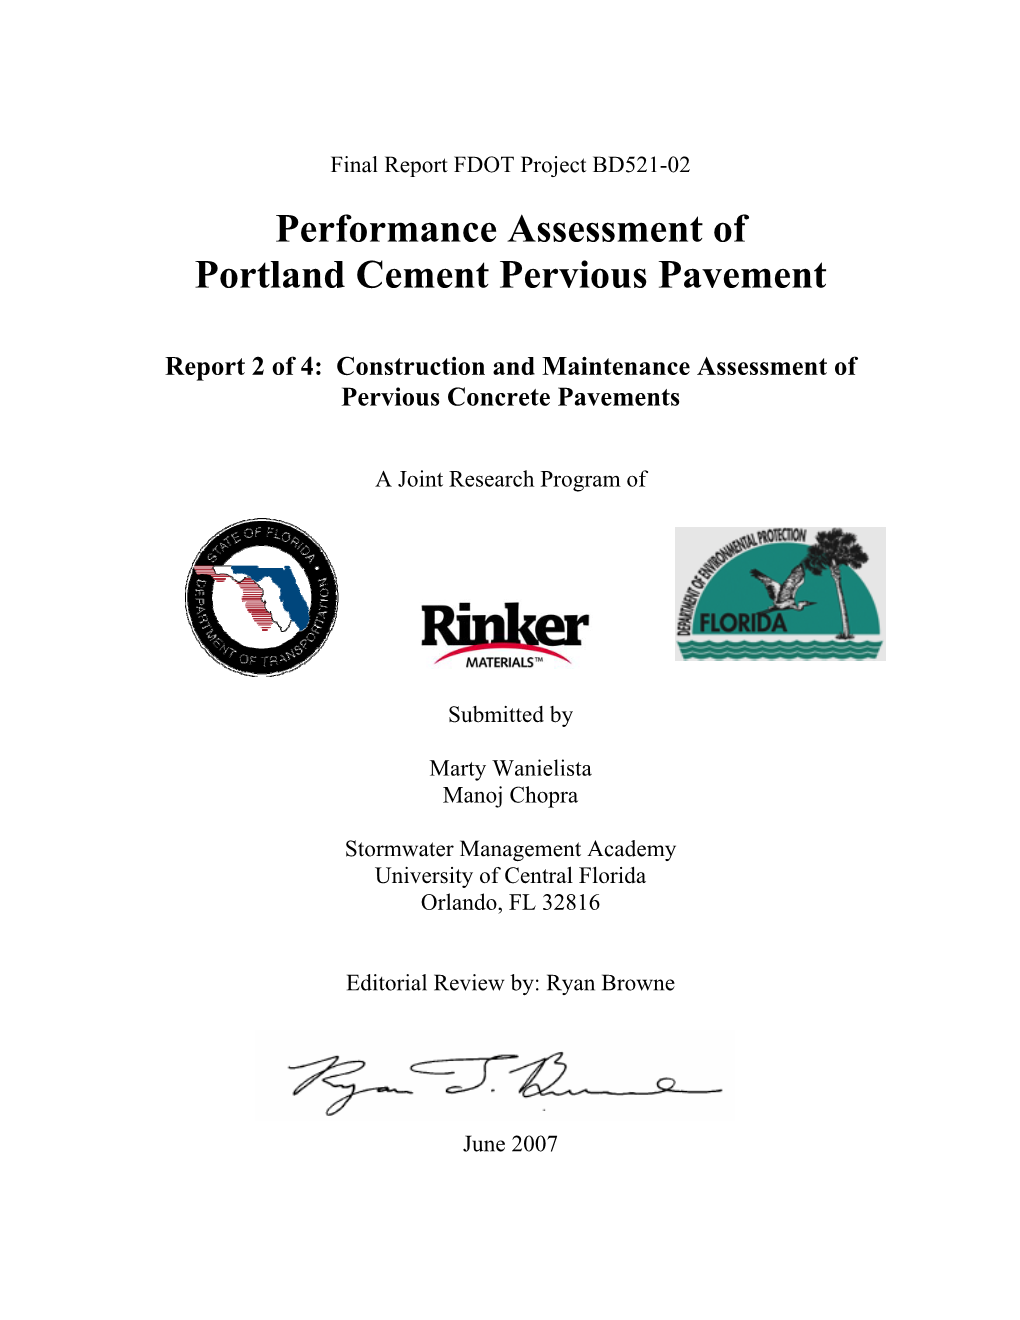 Performance Assessment of Portland Cement Pervious Pavement